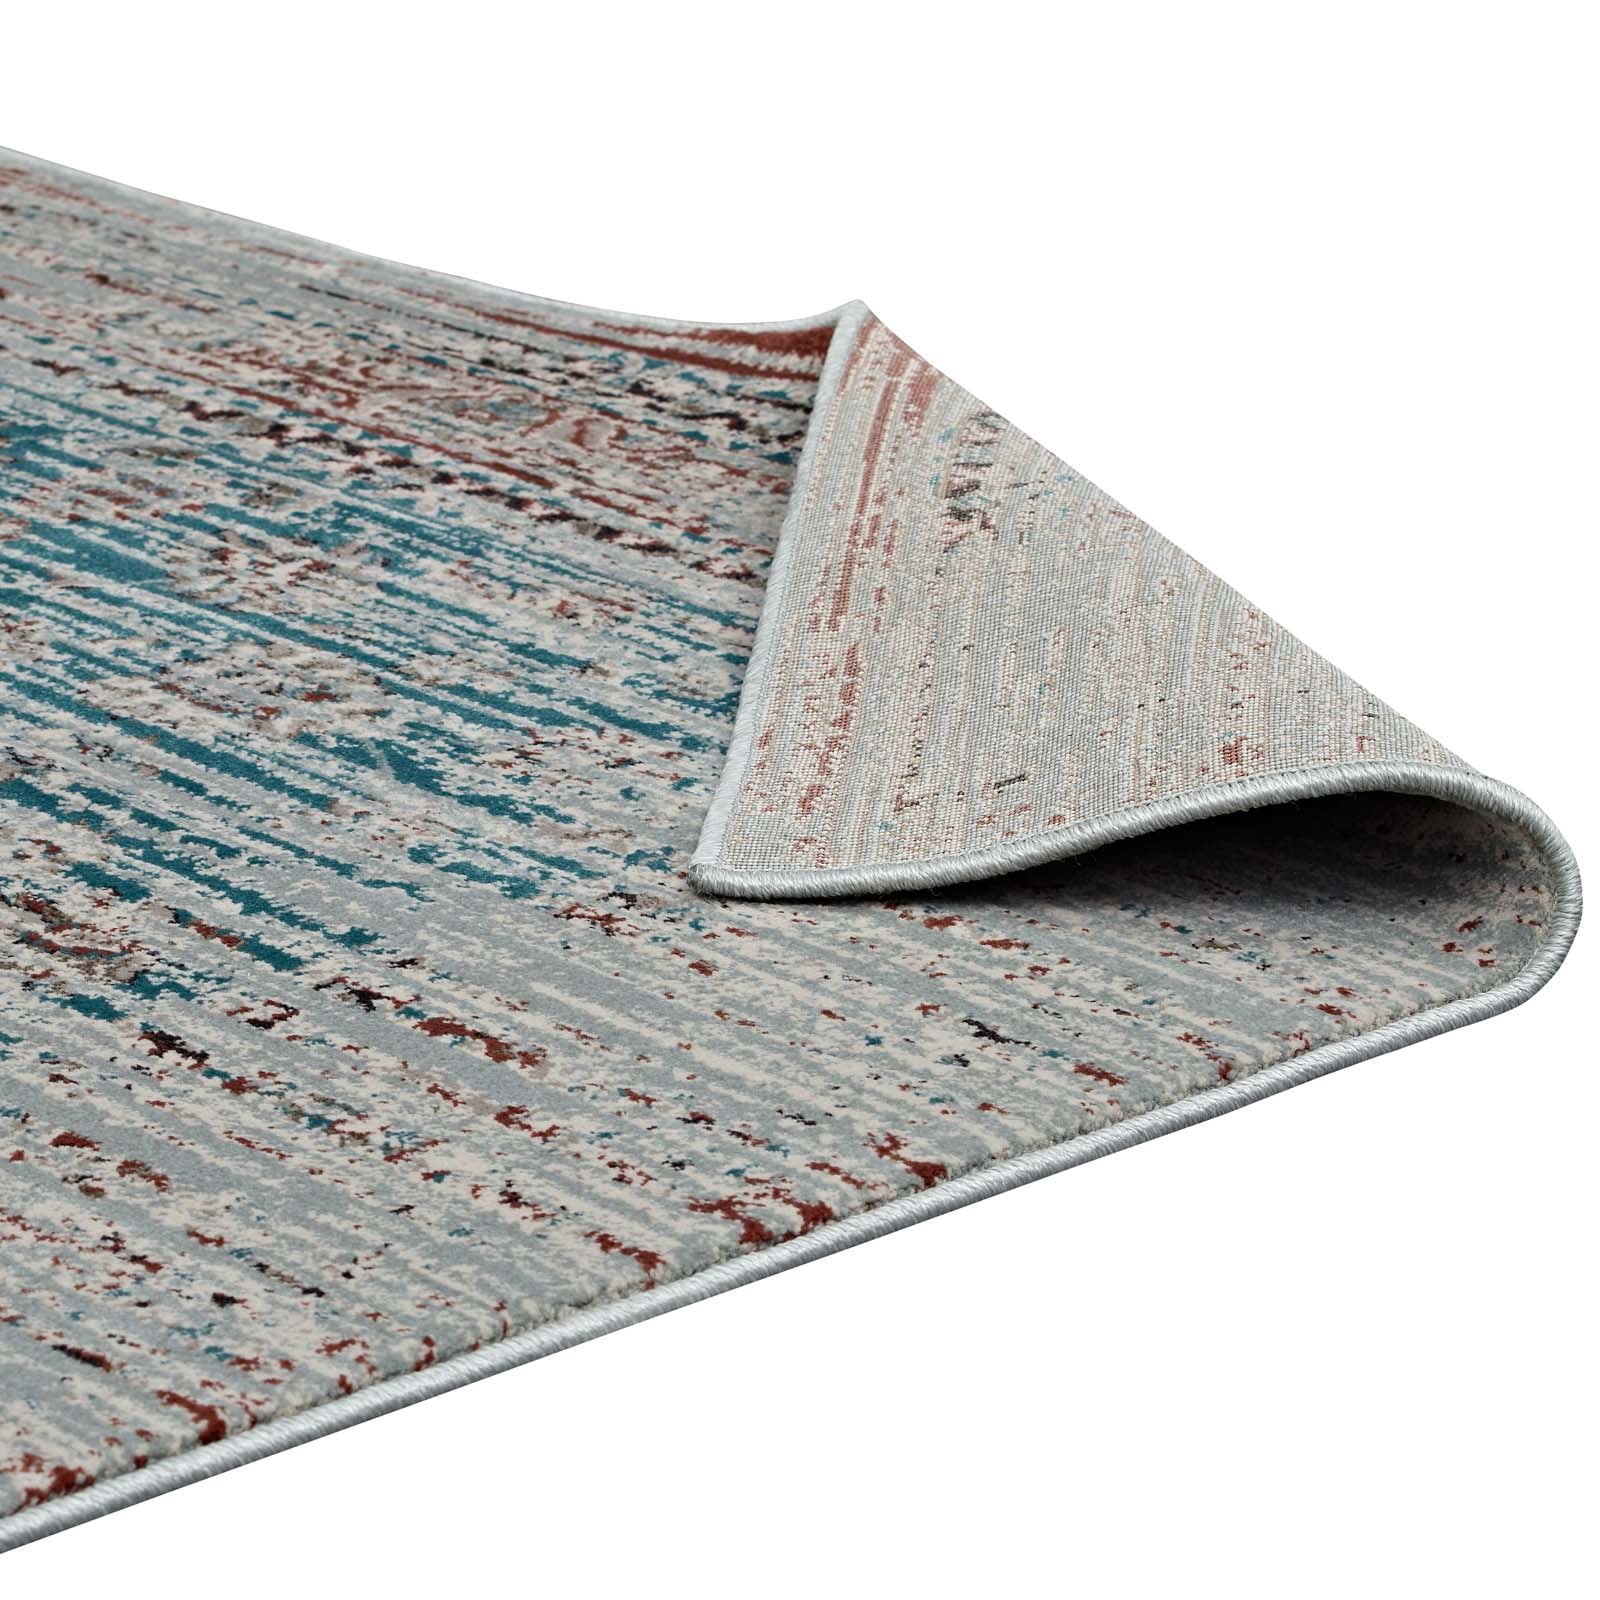 Modway Indoor Rugs - Hesper Distressed Contemporary Floral Lattice 5x8 Area Rug Teal & Beige